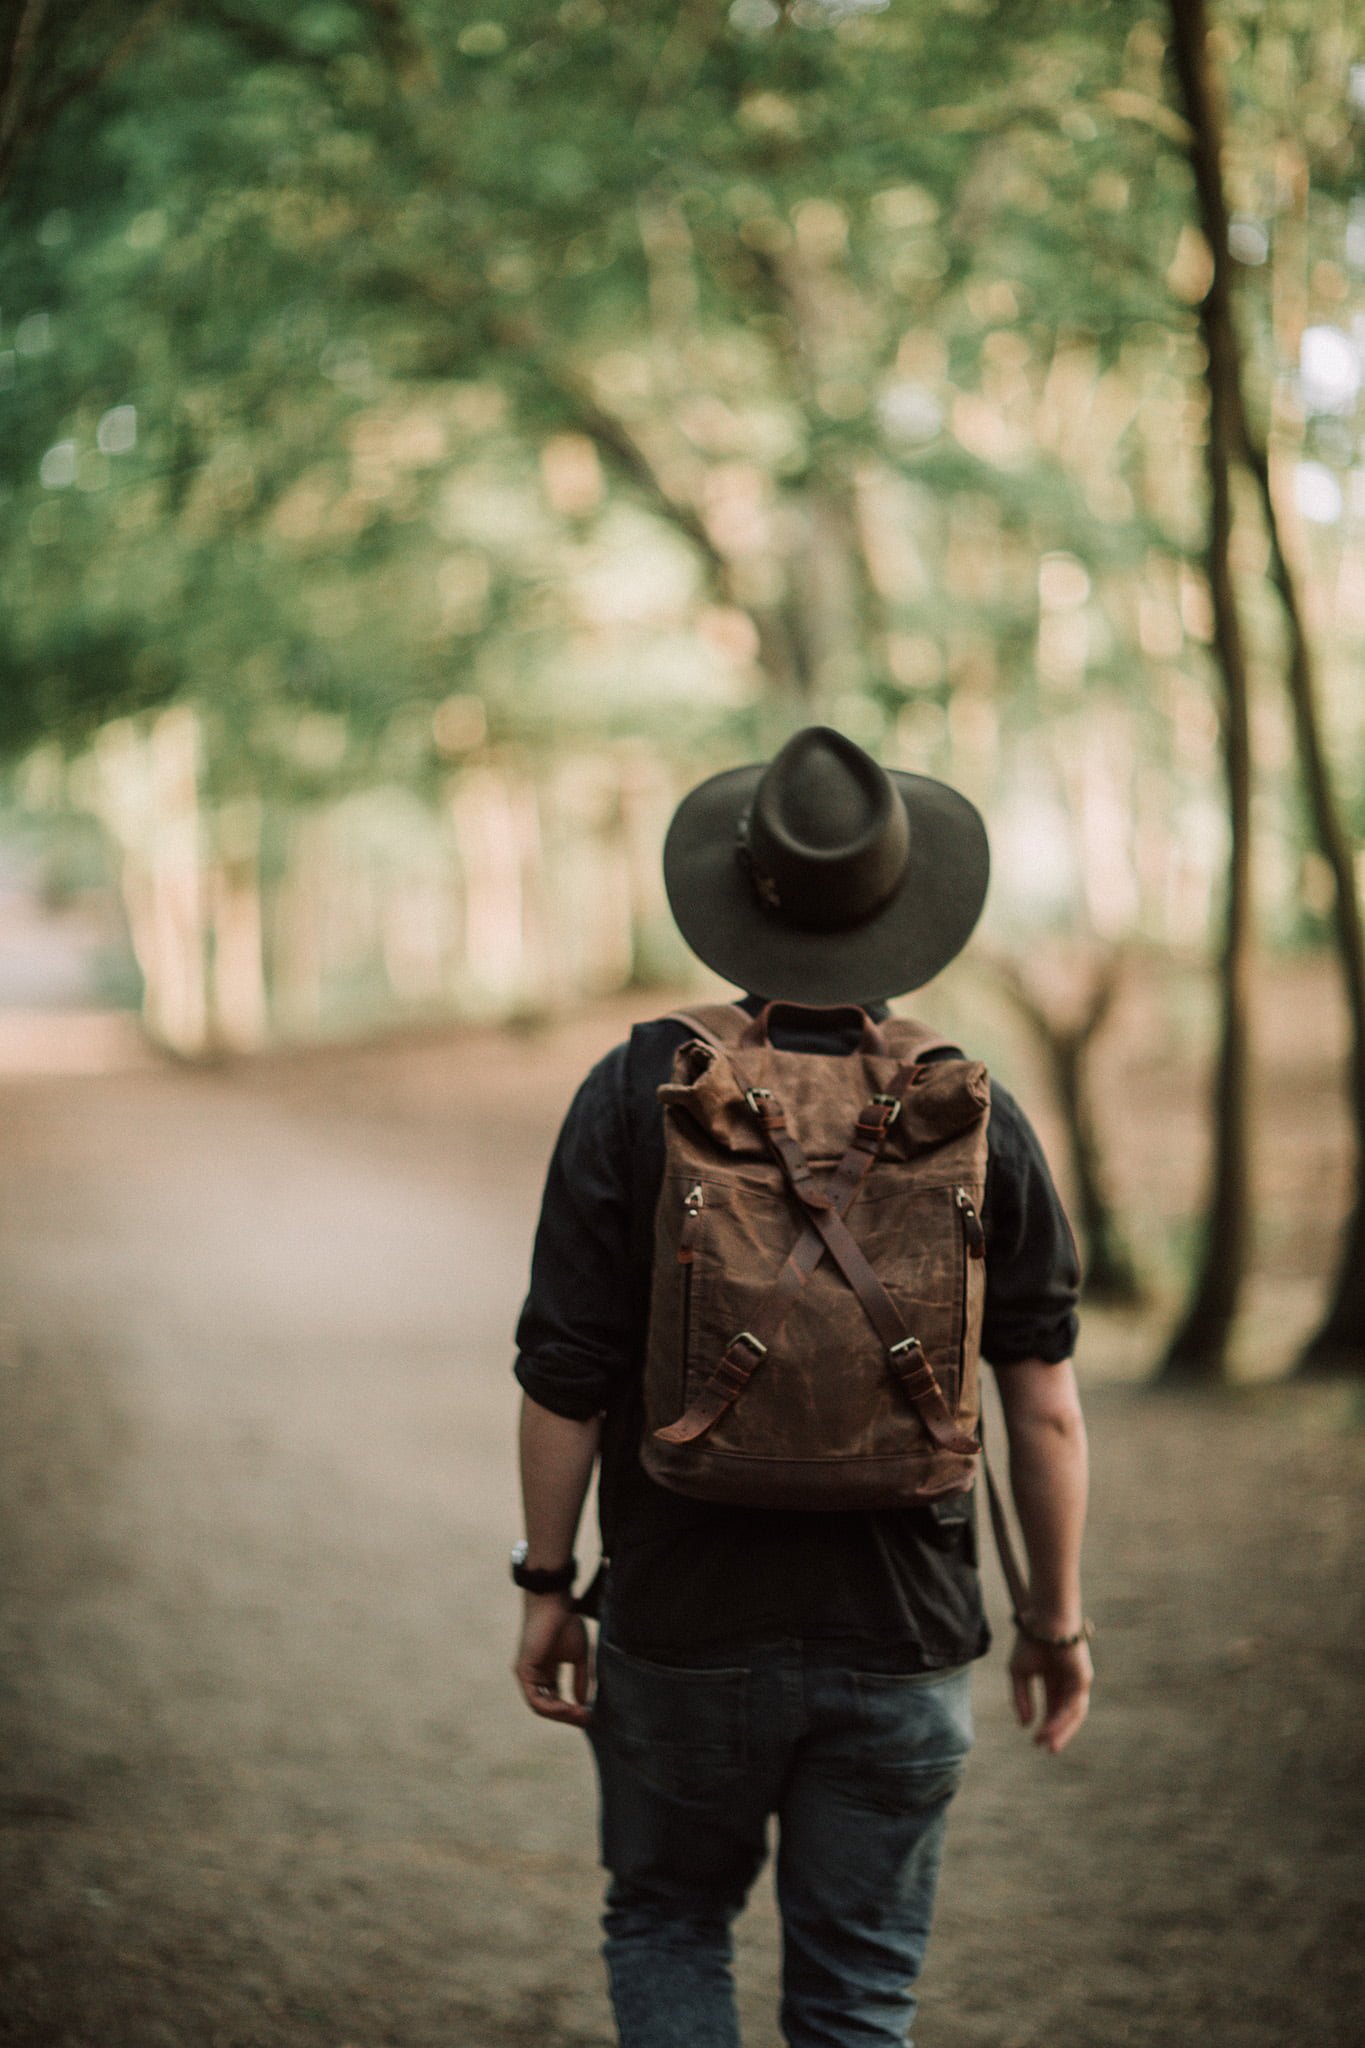 Waxed Cotton Canvas and Leather Backpack Rucksack - Menswear Denim Rugged Style Outfit Royden Park, Wirral, Merseyside - The Harlington in Sandstone by Oldfield - Photo by Samuel Mills